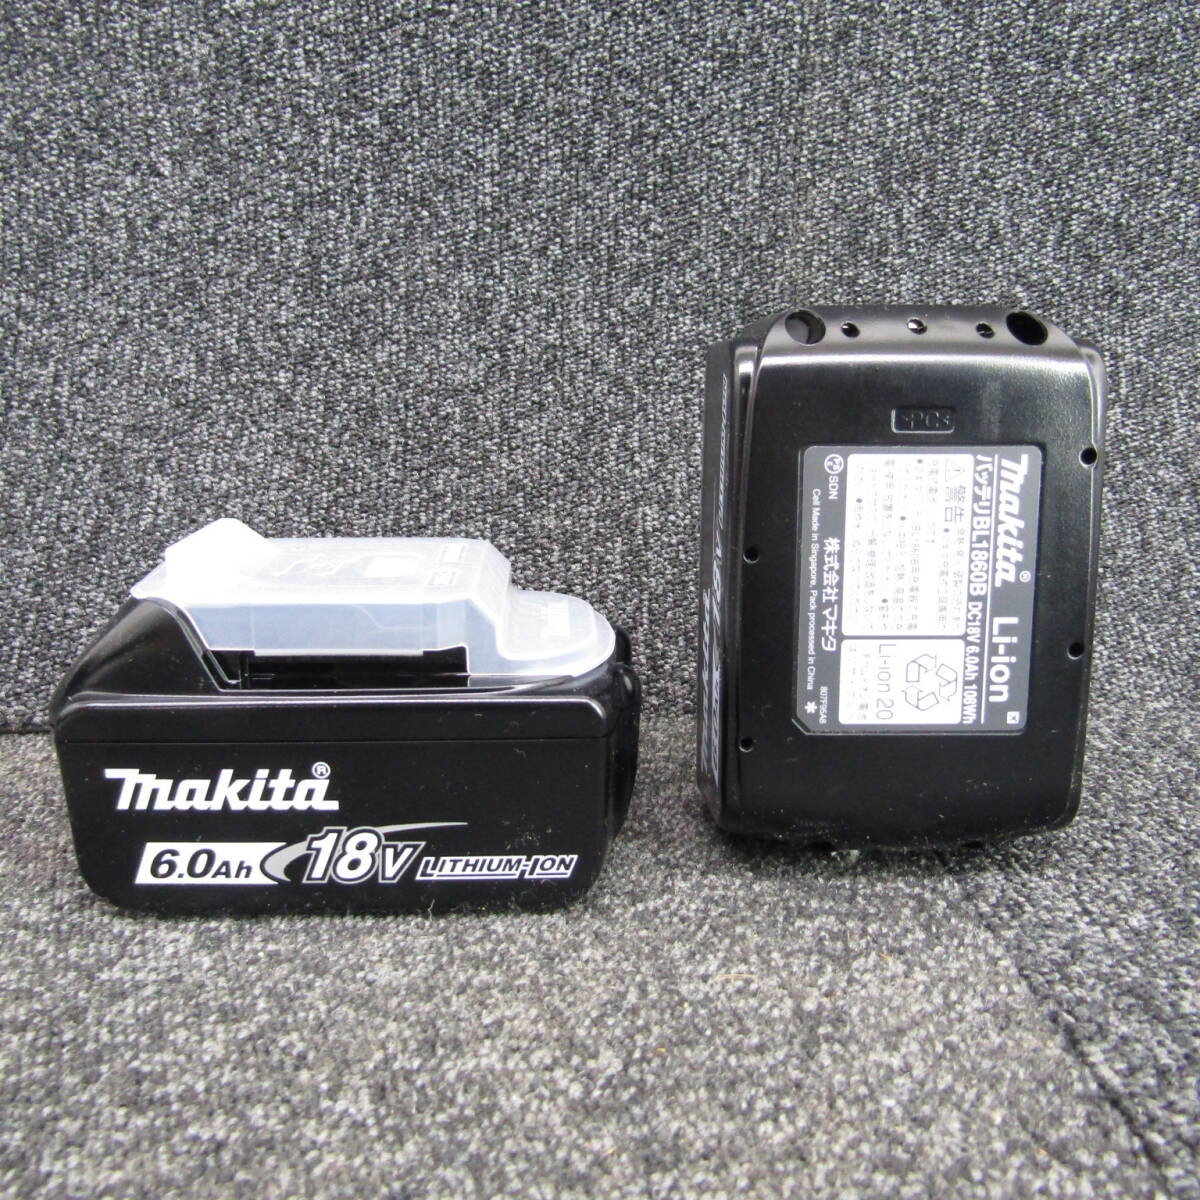  prompt decision equipped![ unused goods ]* Makita (makita) cordless impact driver TD173DGXFY*akto tool Toyama shop *BY